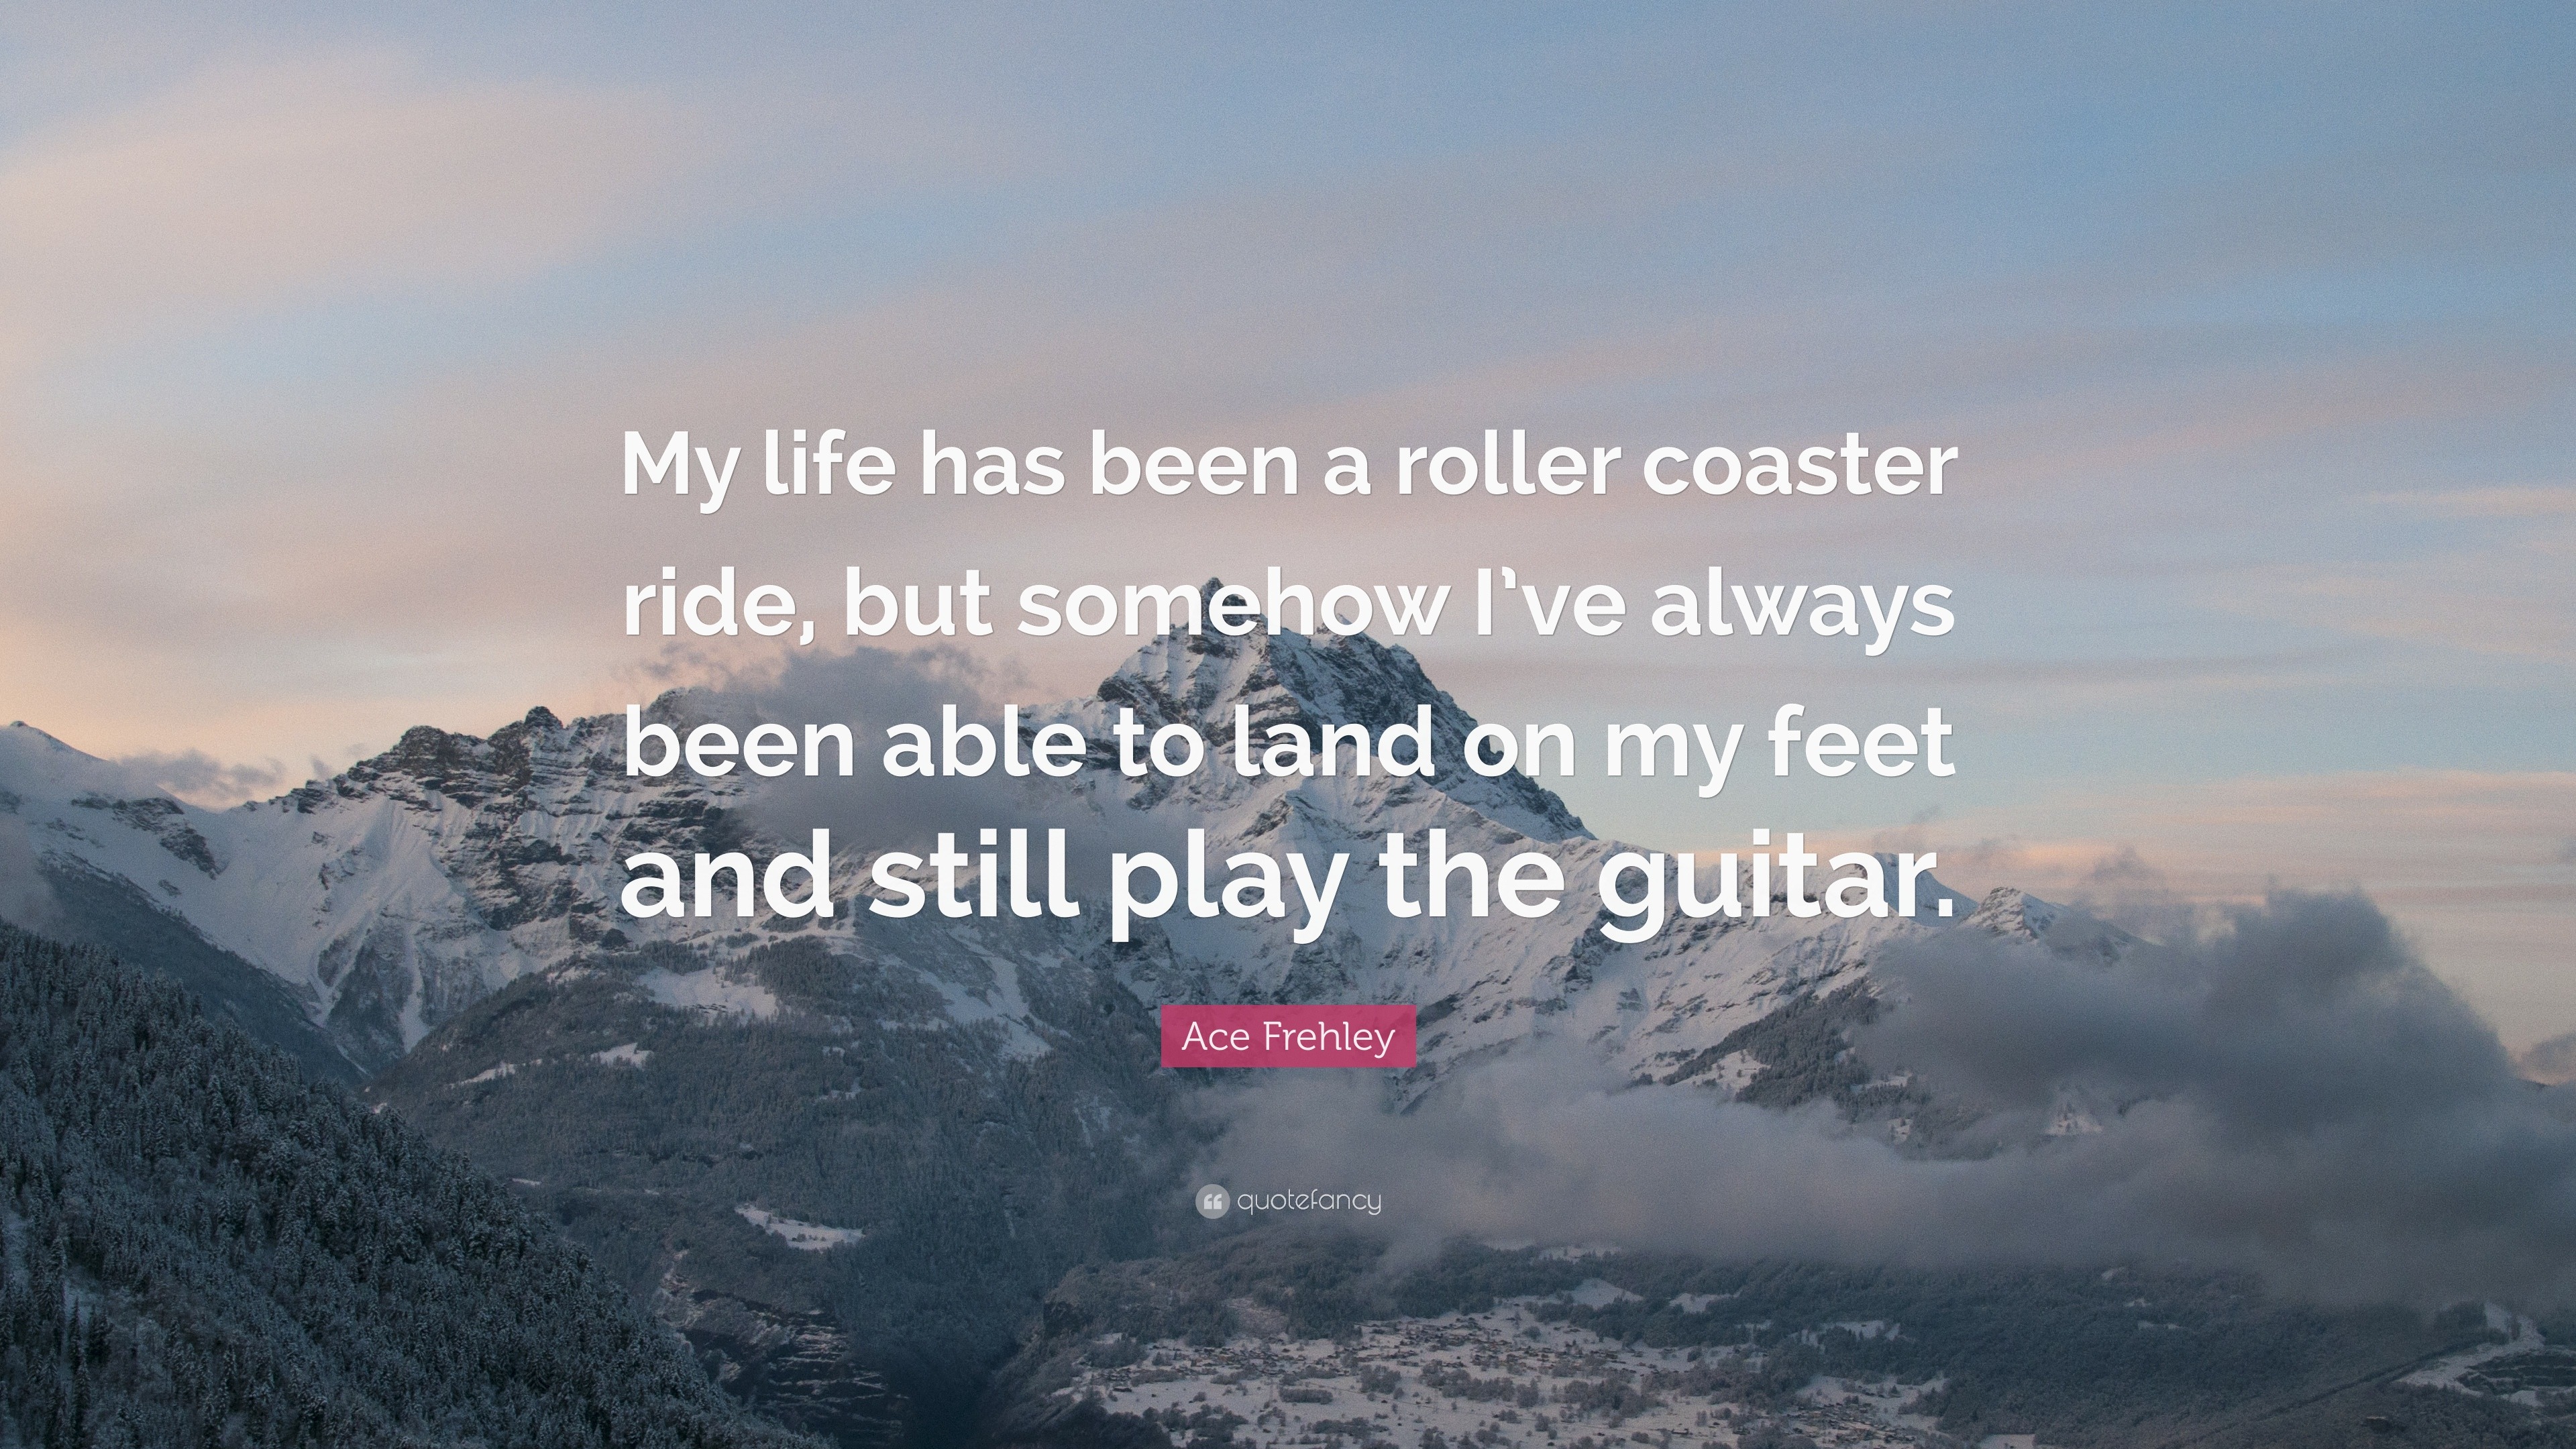 Ace Frehley Quote: “My Life Has Been A Roller Coaster Ride, But Somehow I've Always